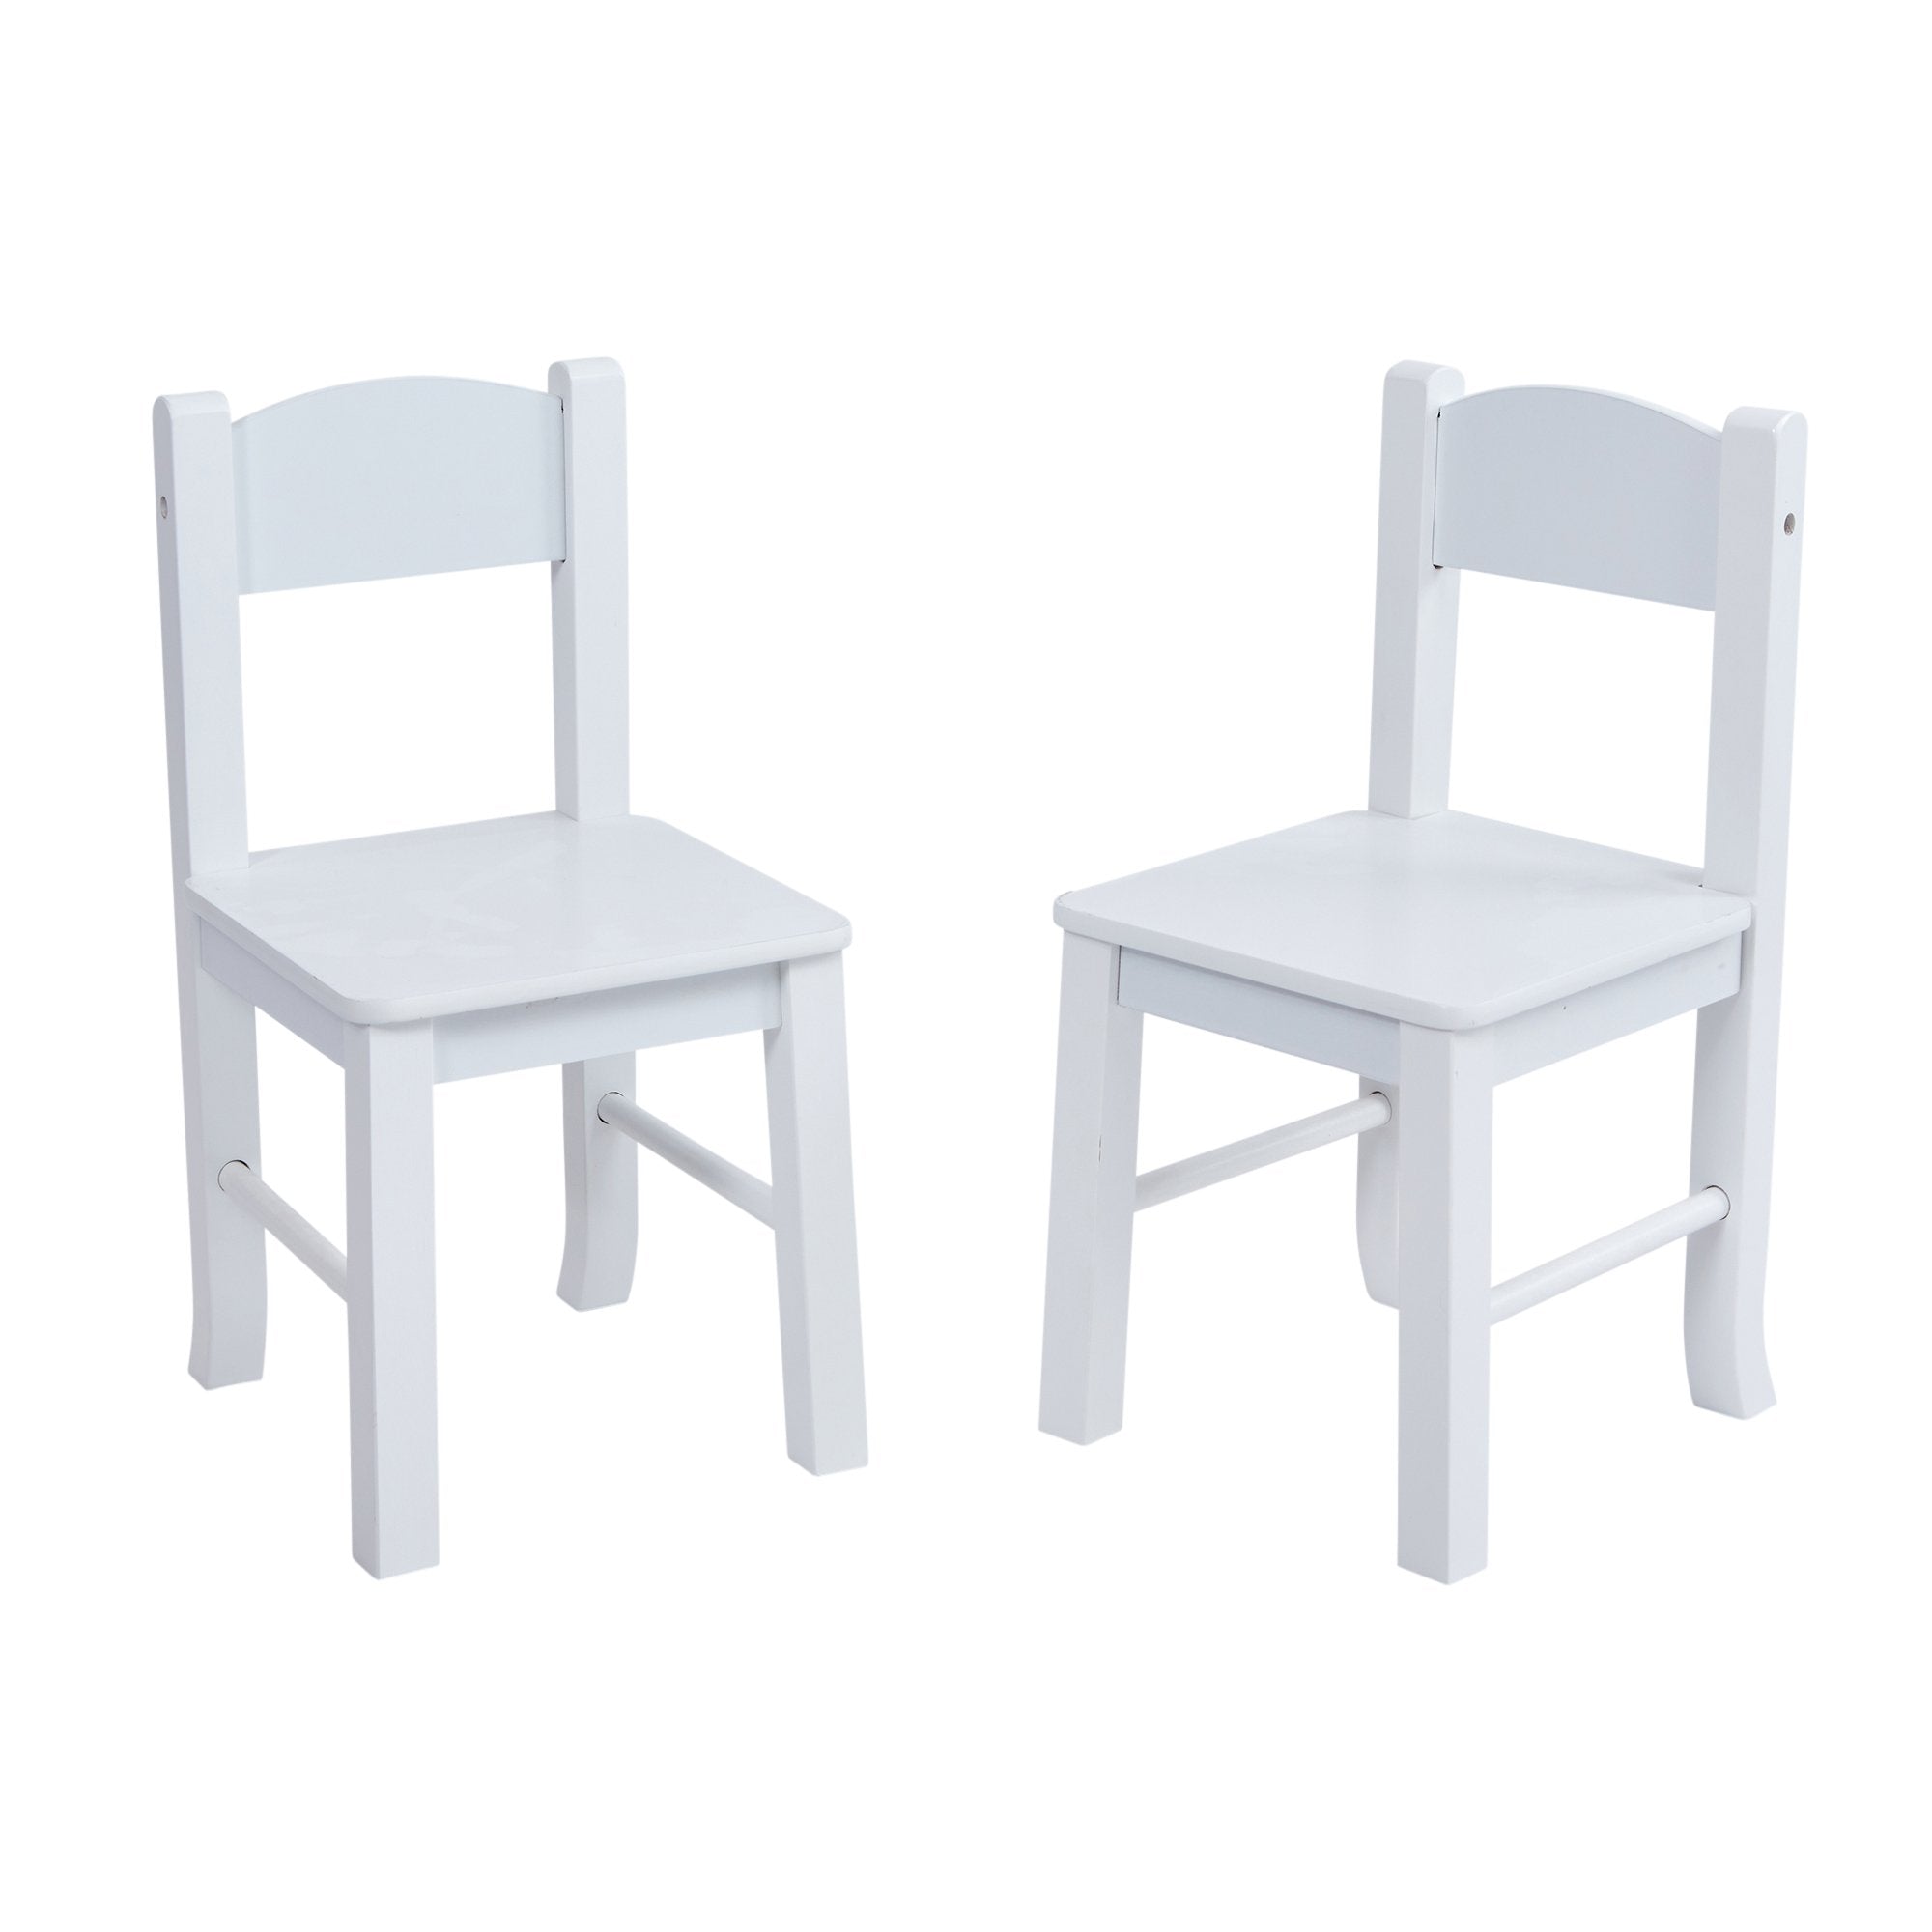 White Solid Wooden Table & Chairs - Liberty House Toys - Junior Bambinos